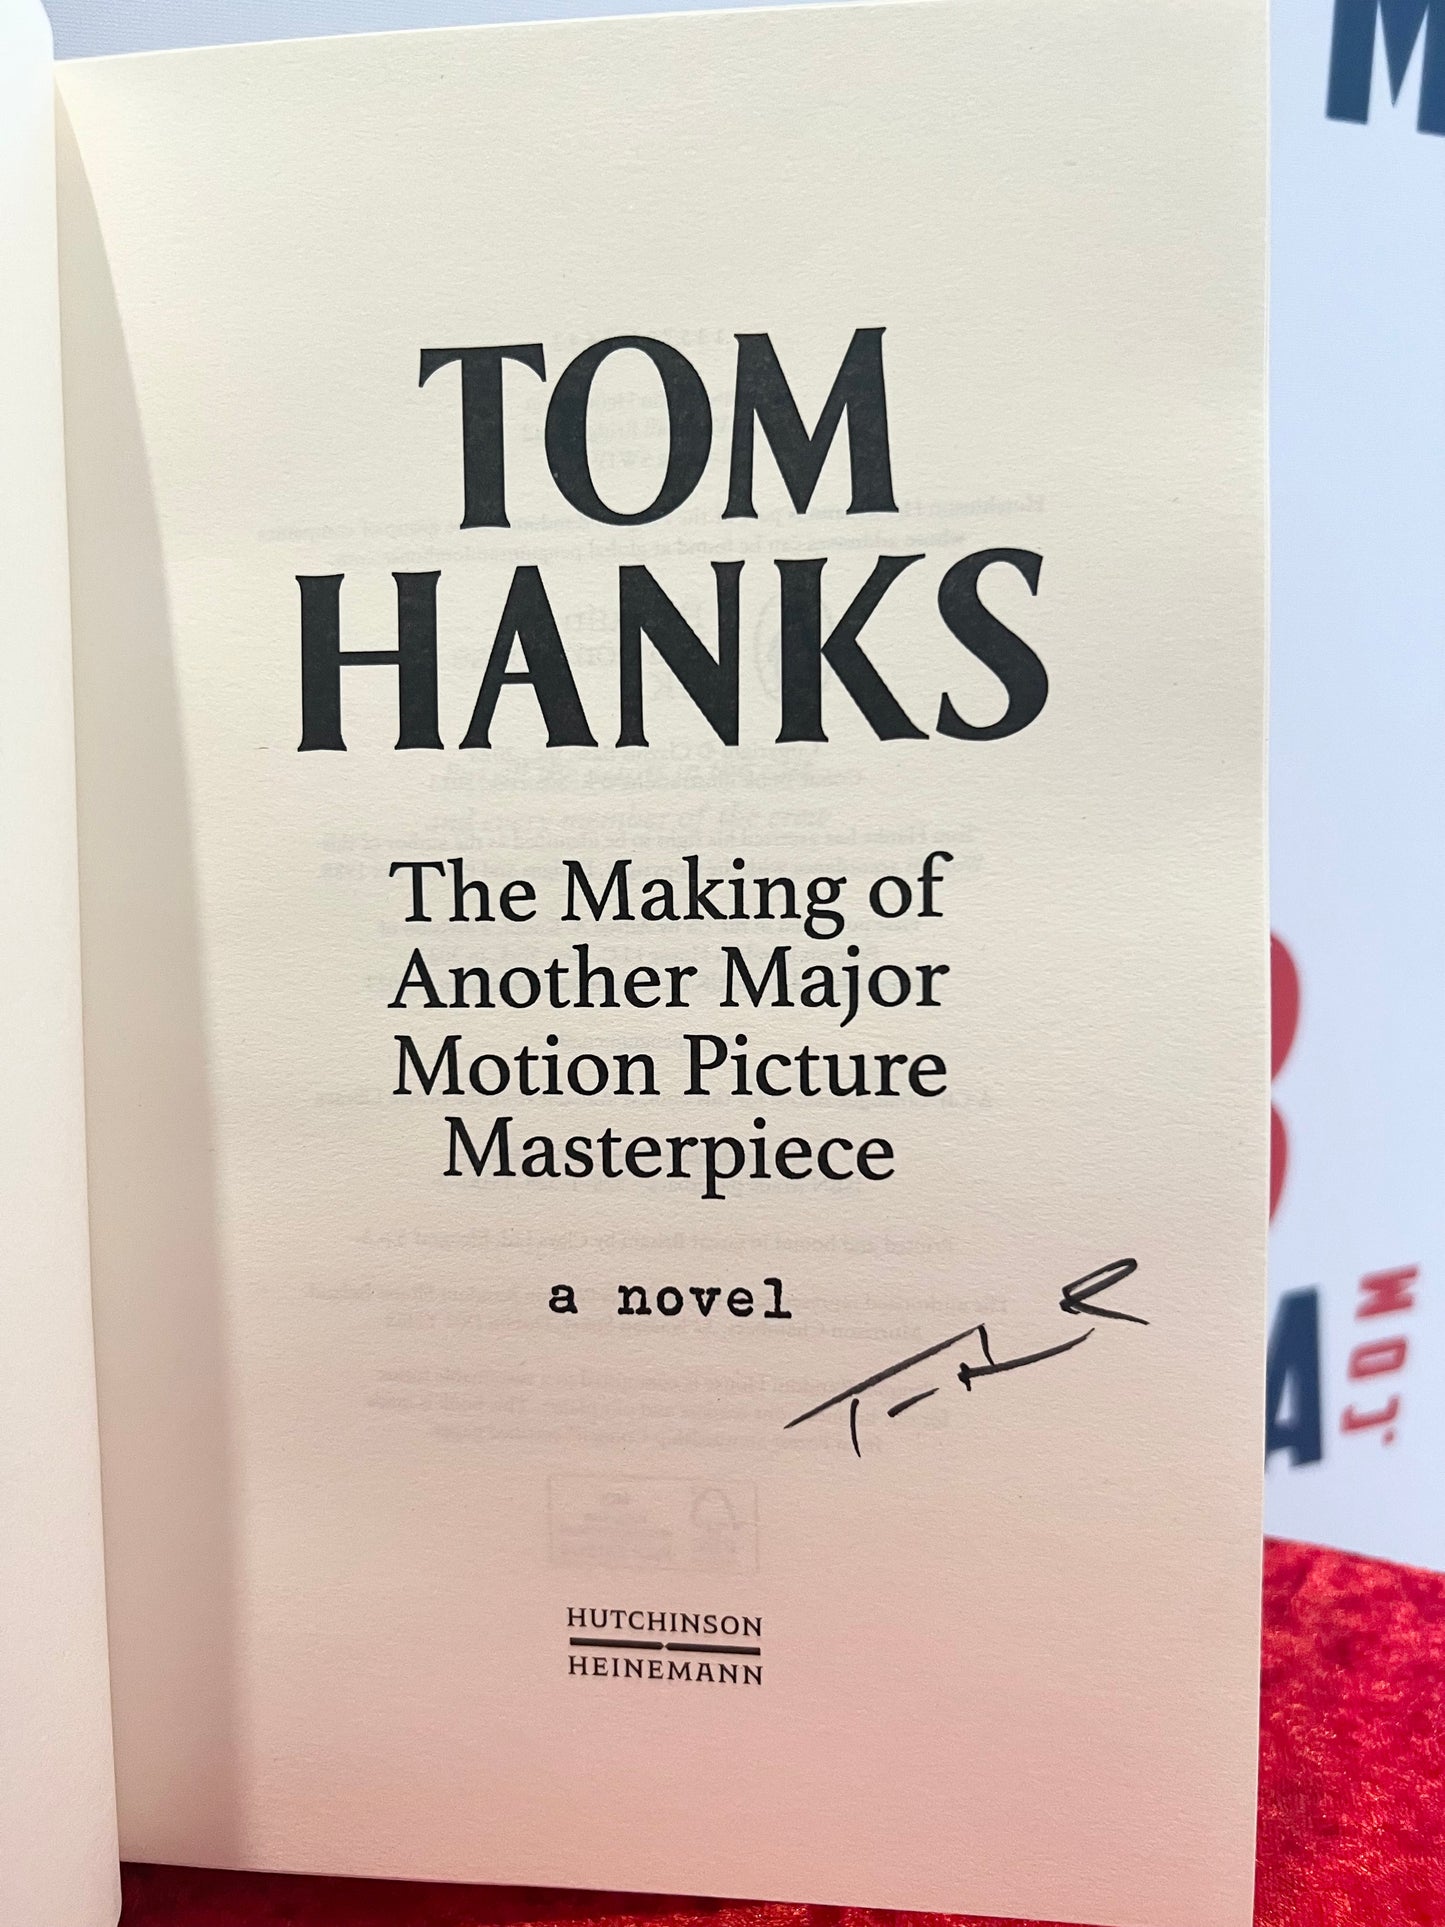 Tom Hanks Signed limited edition book with Coa Rare